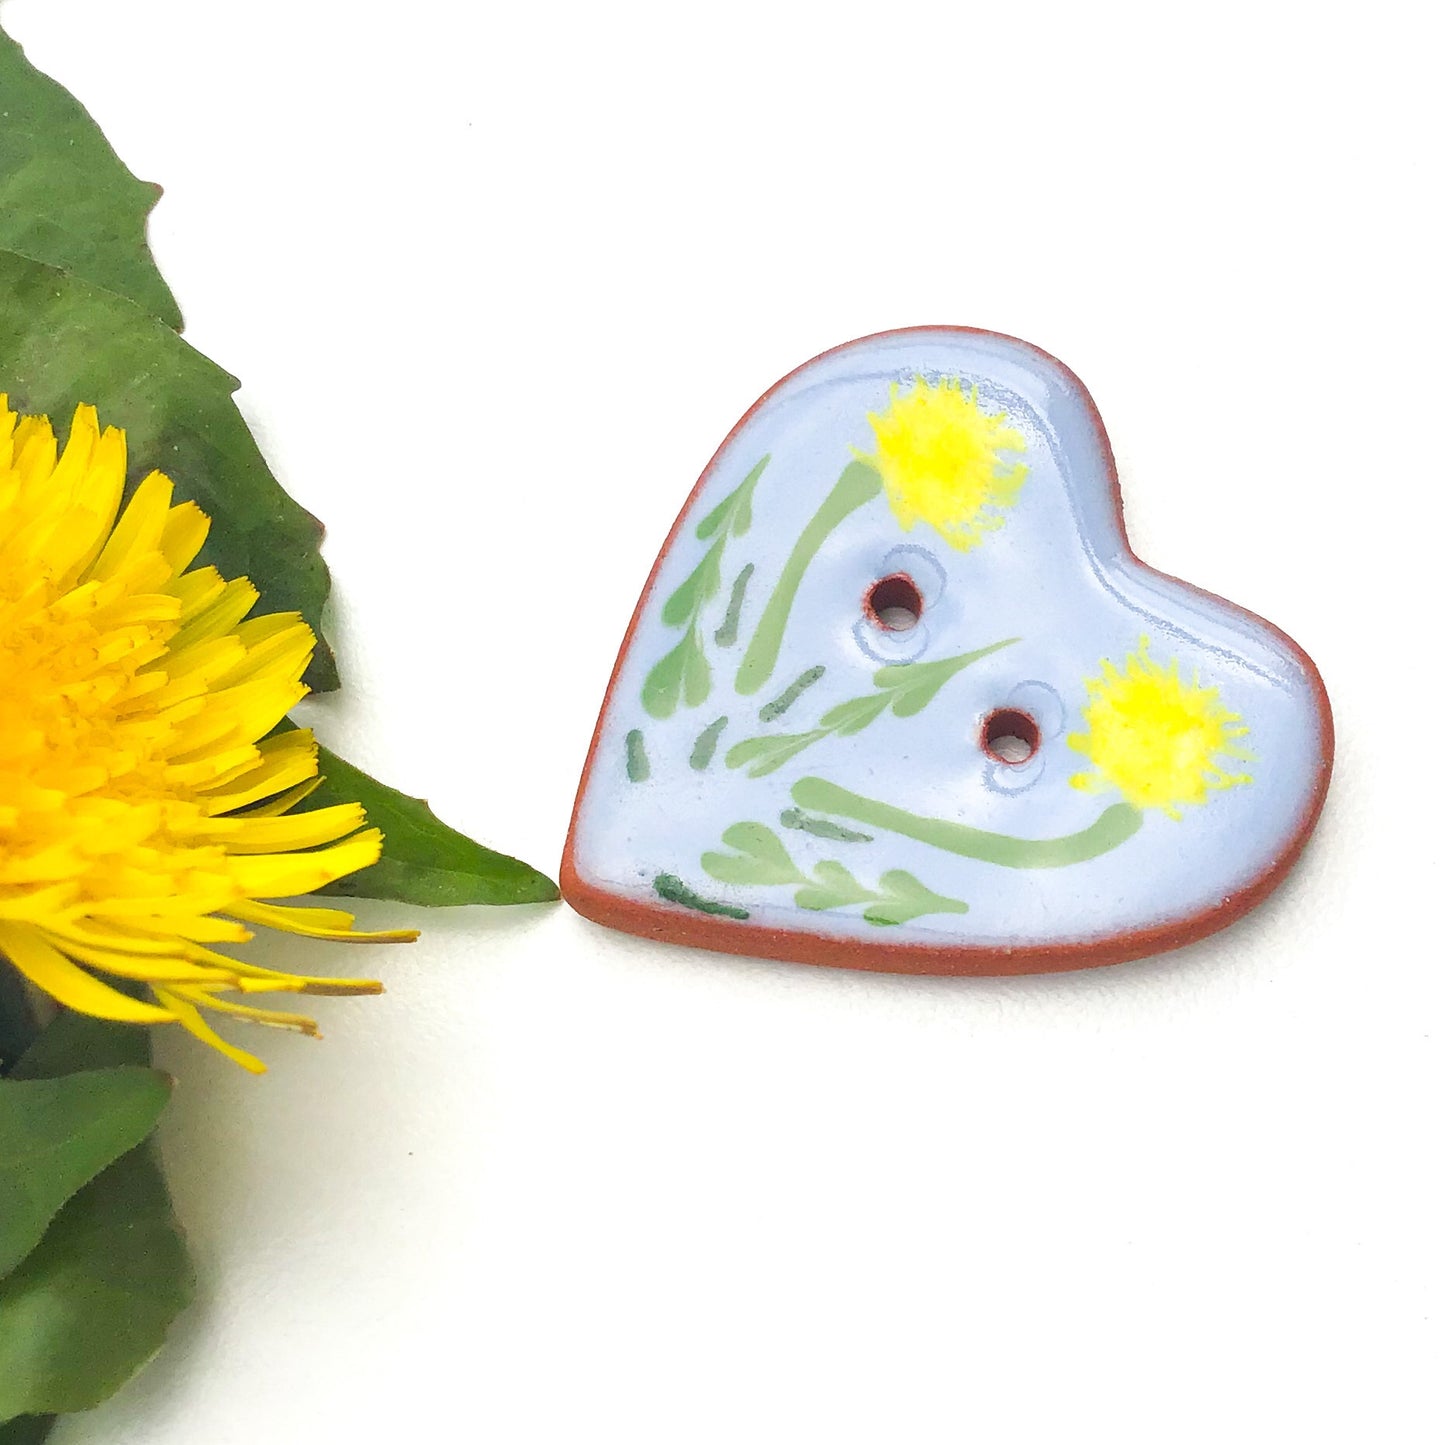 "A Weed is a Flower" Heart Button - Blue Ceramic Heart Button with Dandelions  - 1 3/8"